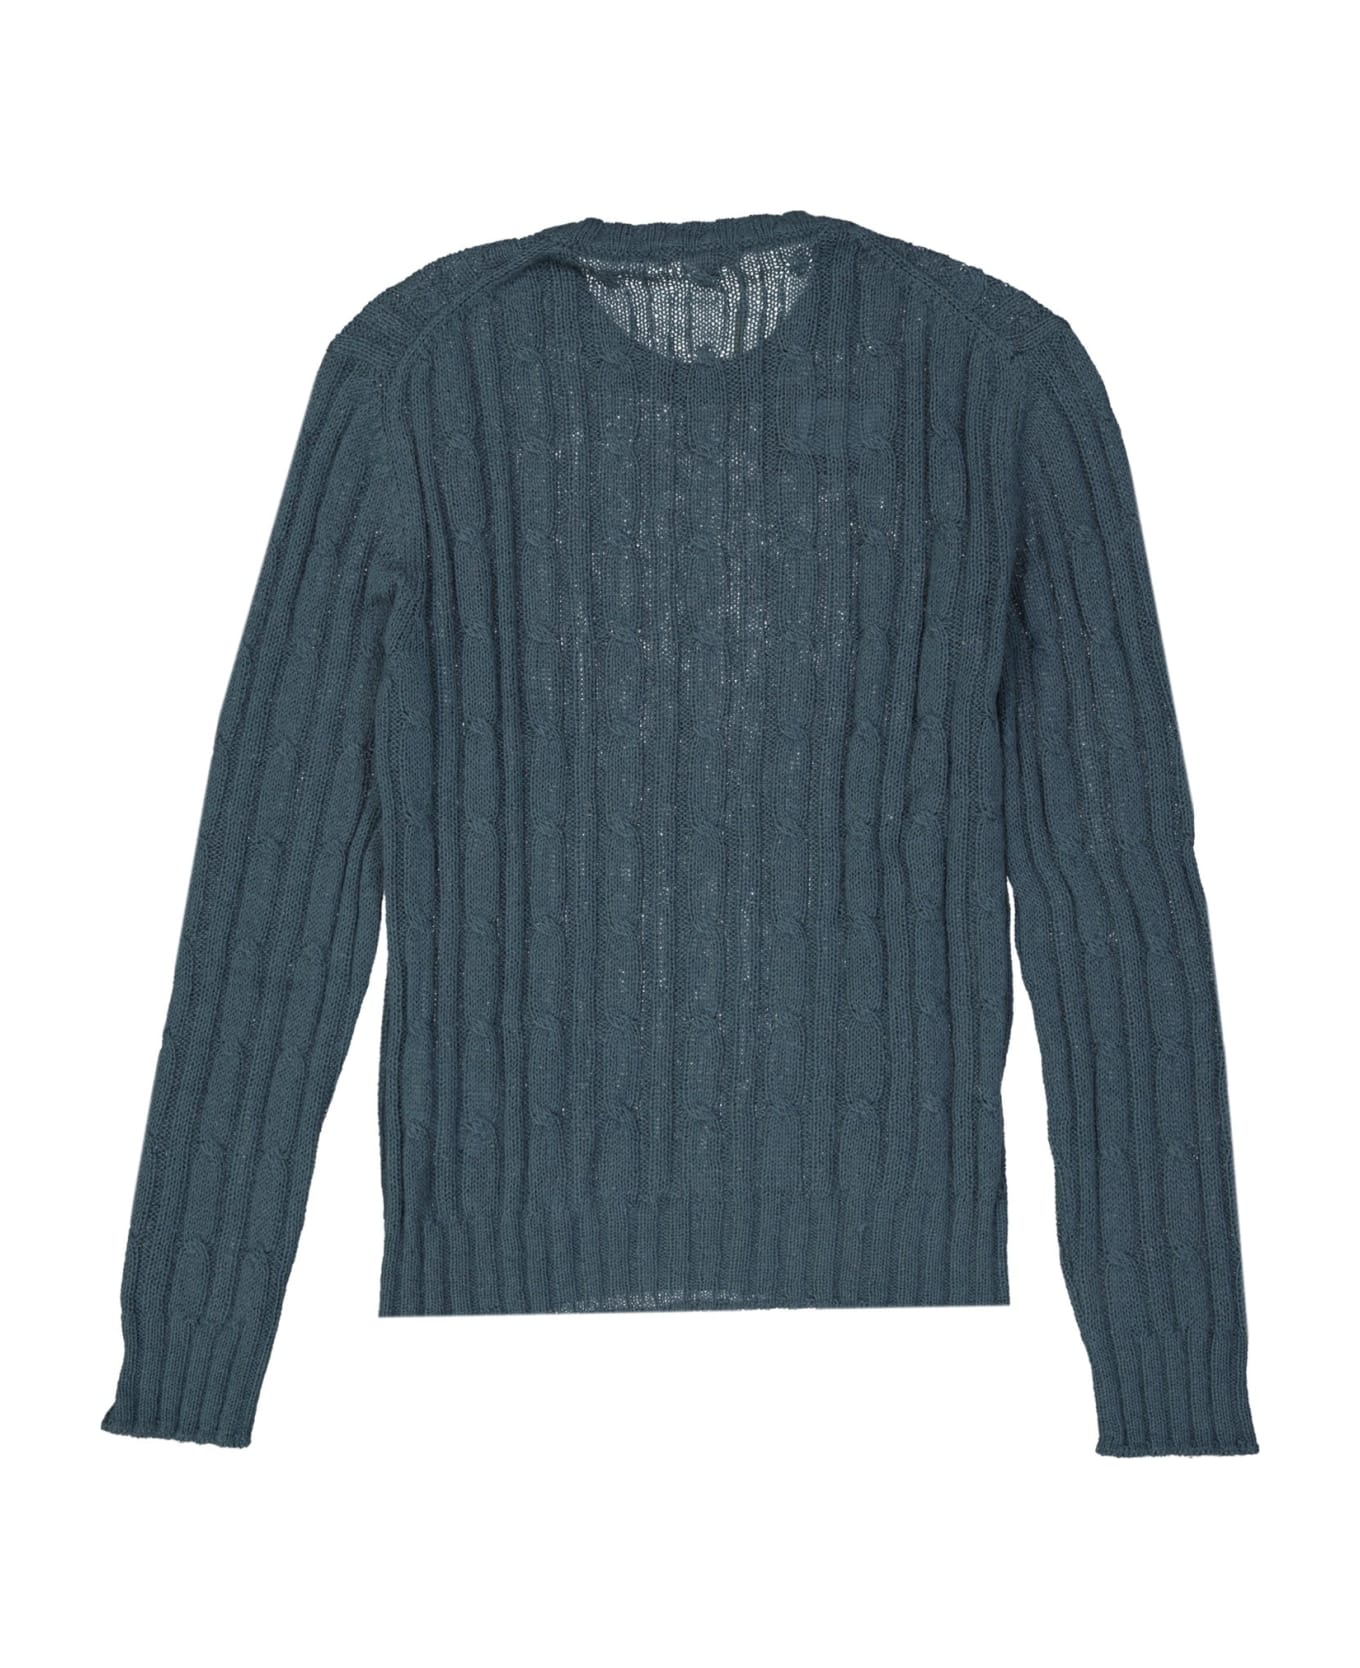 Gucci Cable Knit Sweater - Green ニットウェア